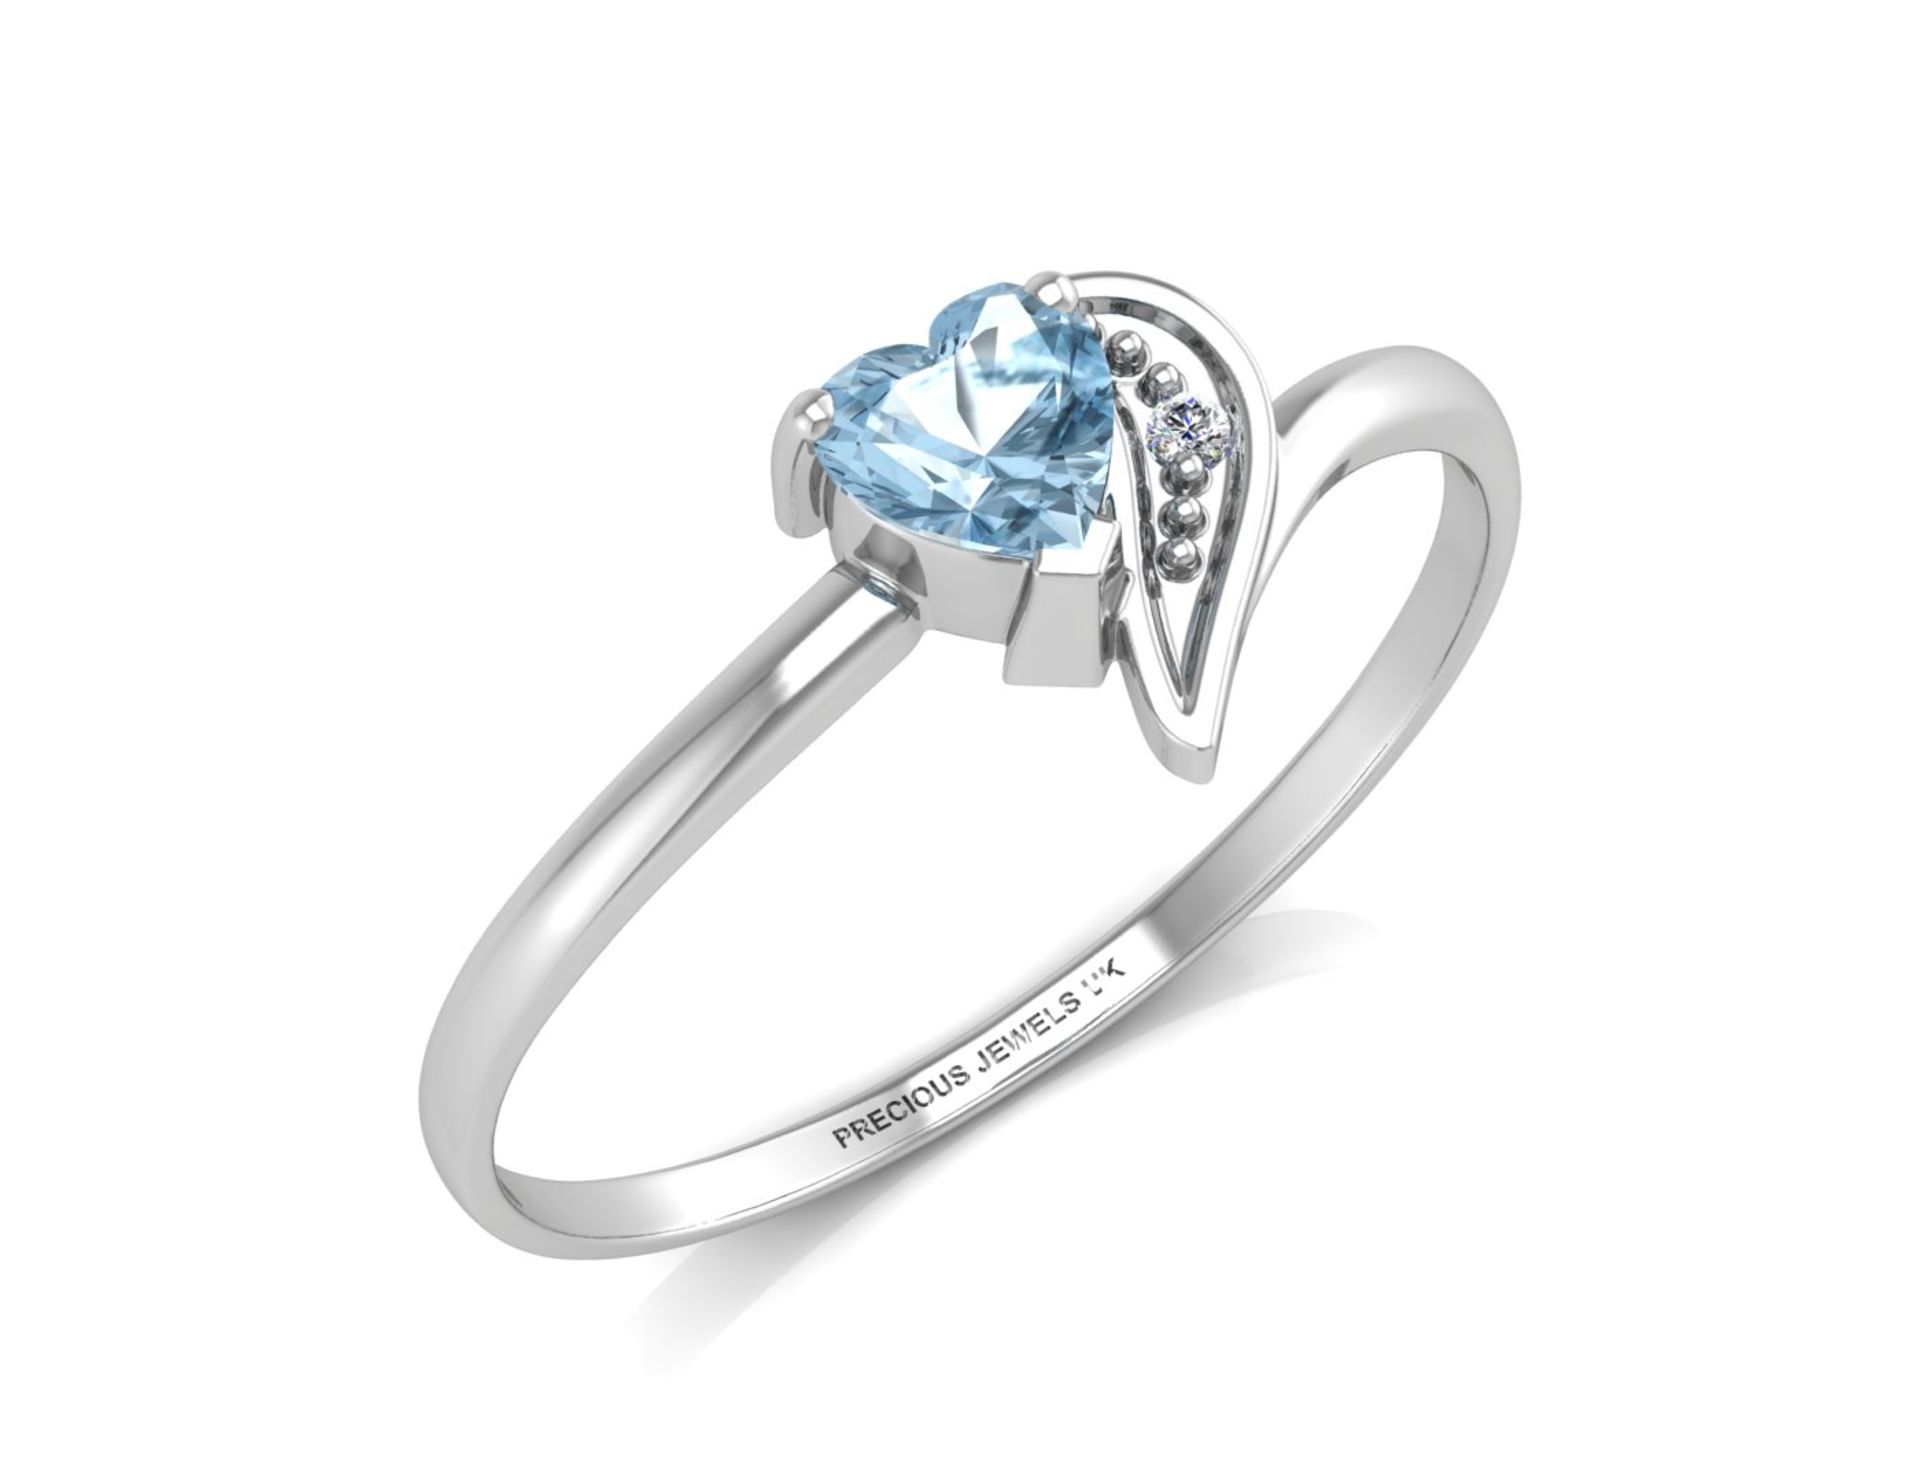 9ct White Gold Fancy Cluster Diamond And Blue Topaz Ring 0.01 Carats Colour - G Clarity -